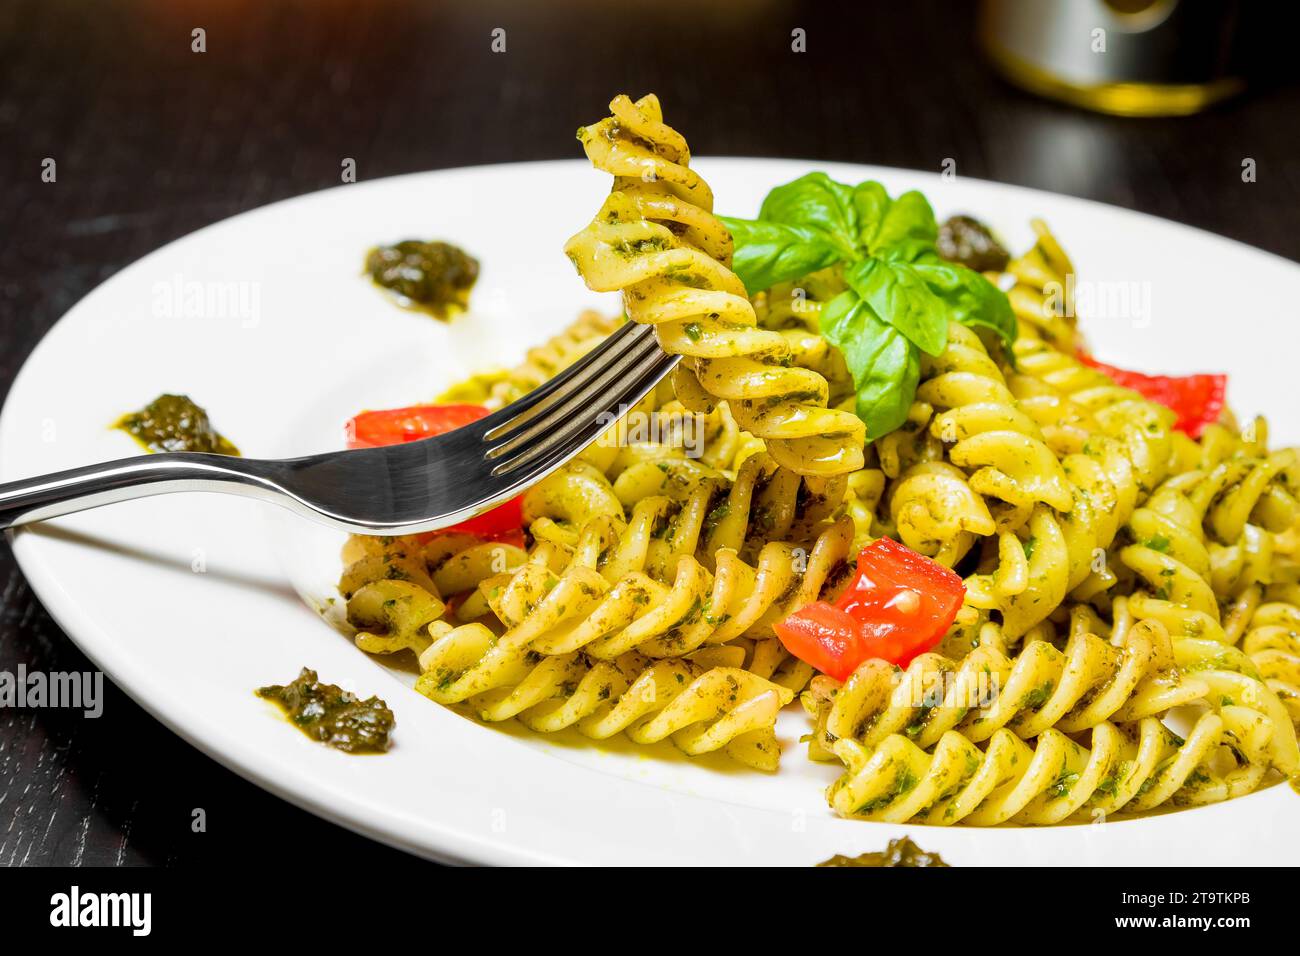 dish of pasta with pesto genovese sauce and vegetables, tomato and basil, detail of fork with fusilli on top on black wood table Stock Photo